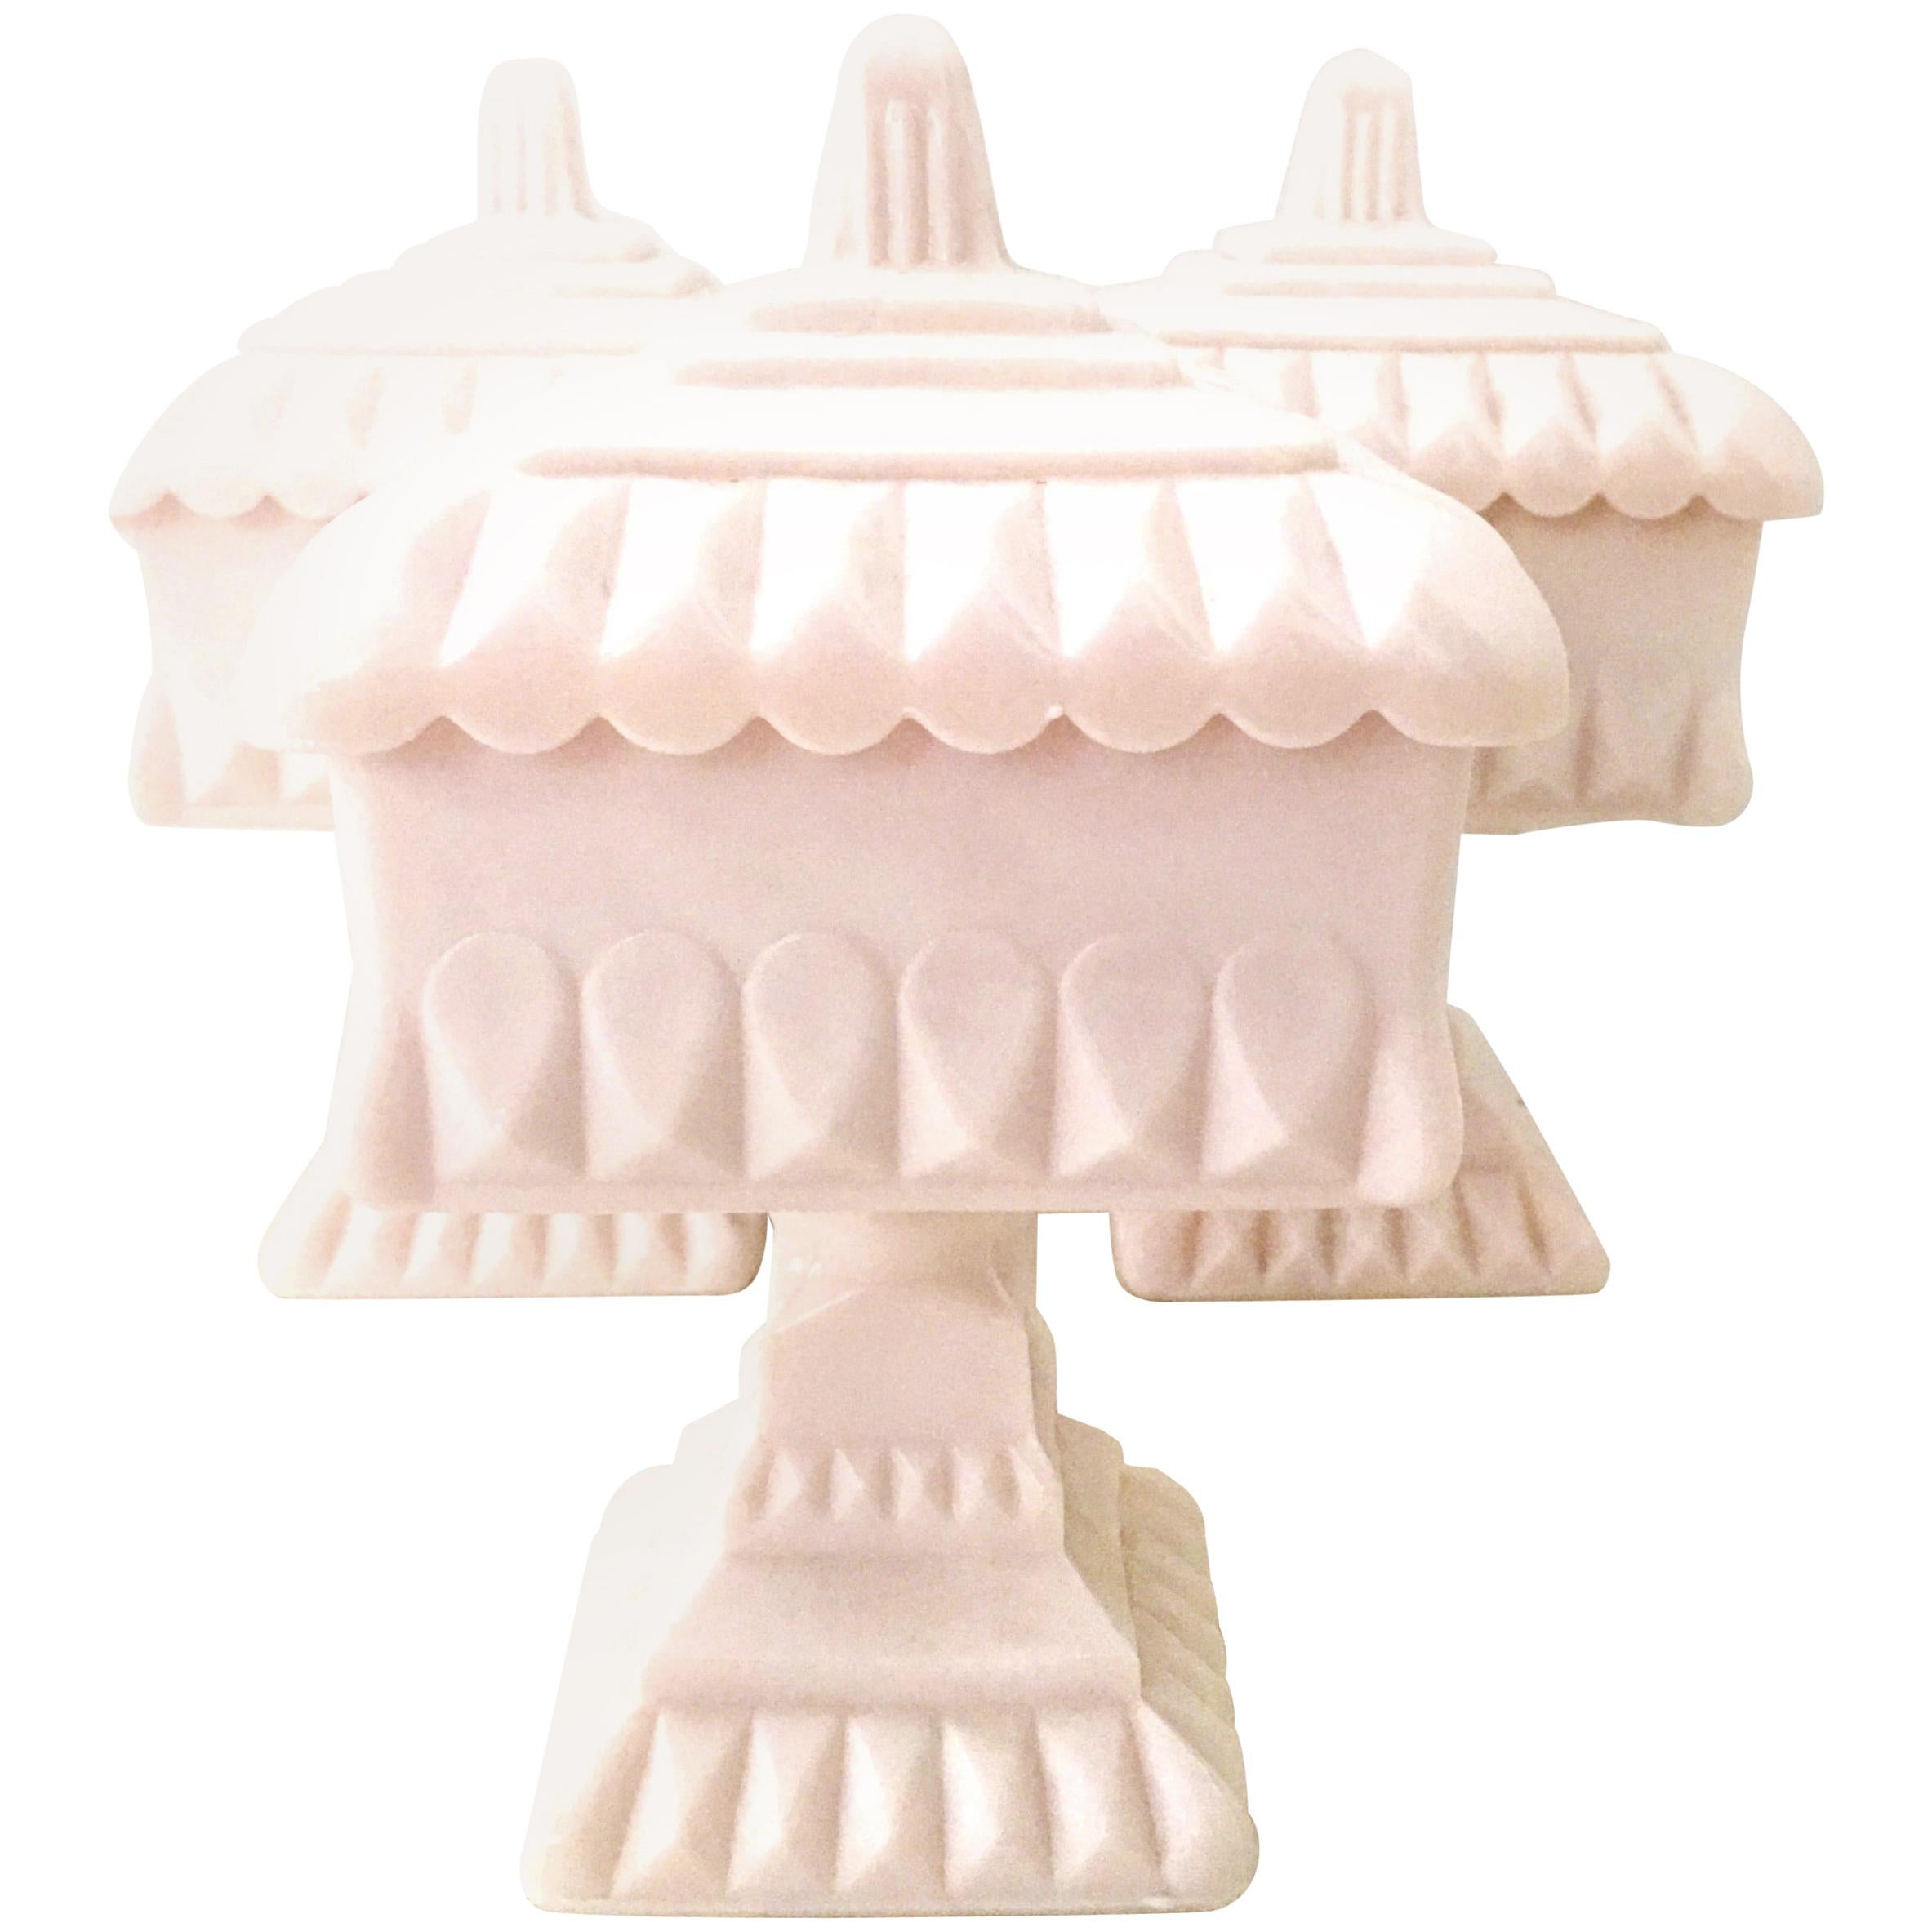 Mid-20th Century Pink Milk Glass Footed Bowls, Set of Three Pieces For Sale